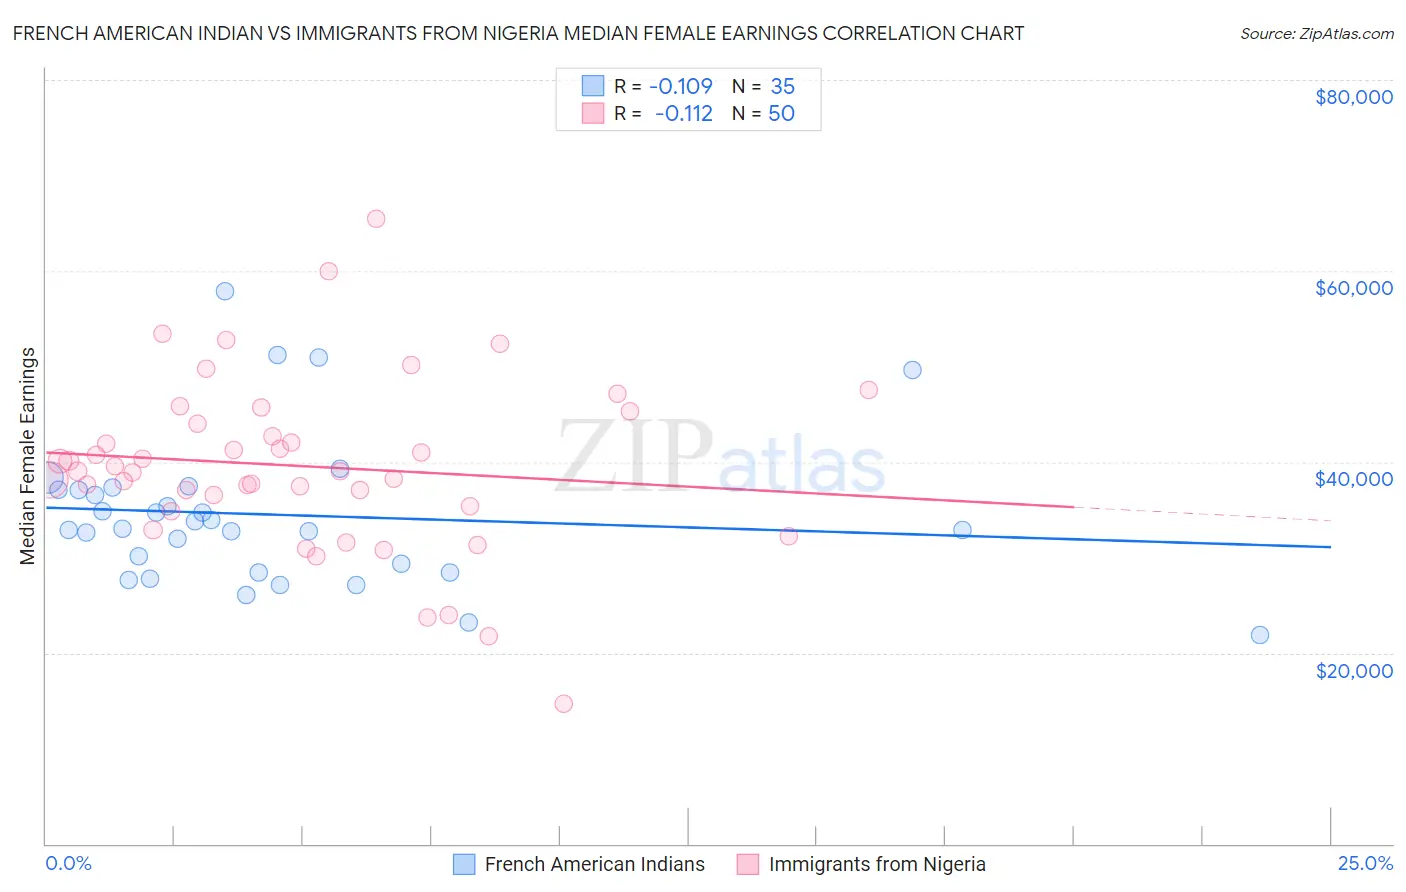 French American Indian vs Immigrants from Nigeria Median Female Earnings